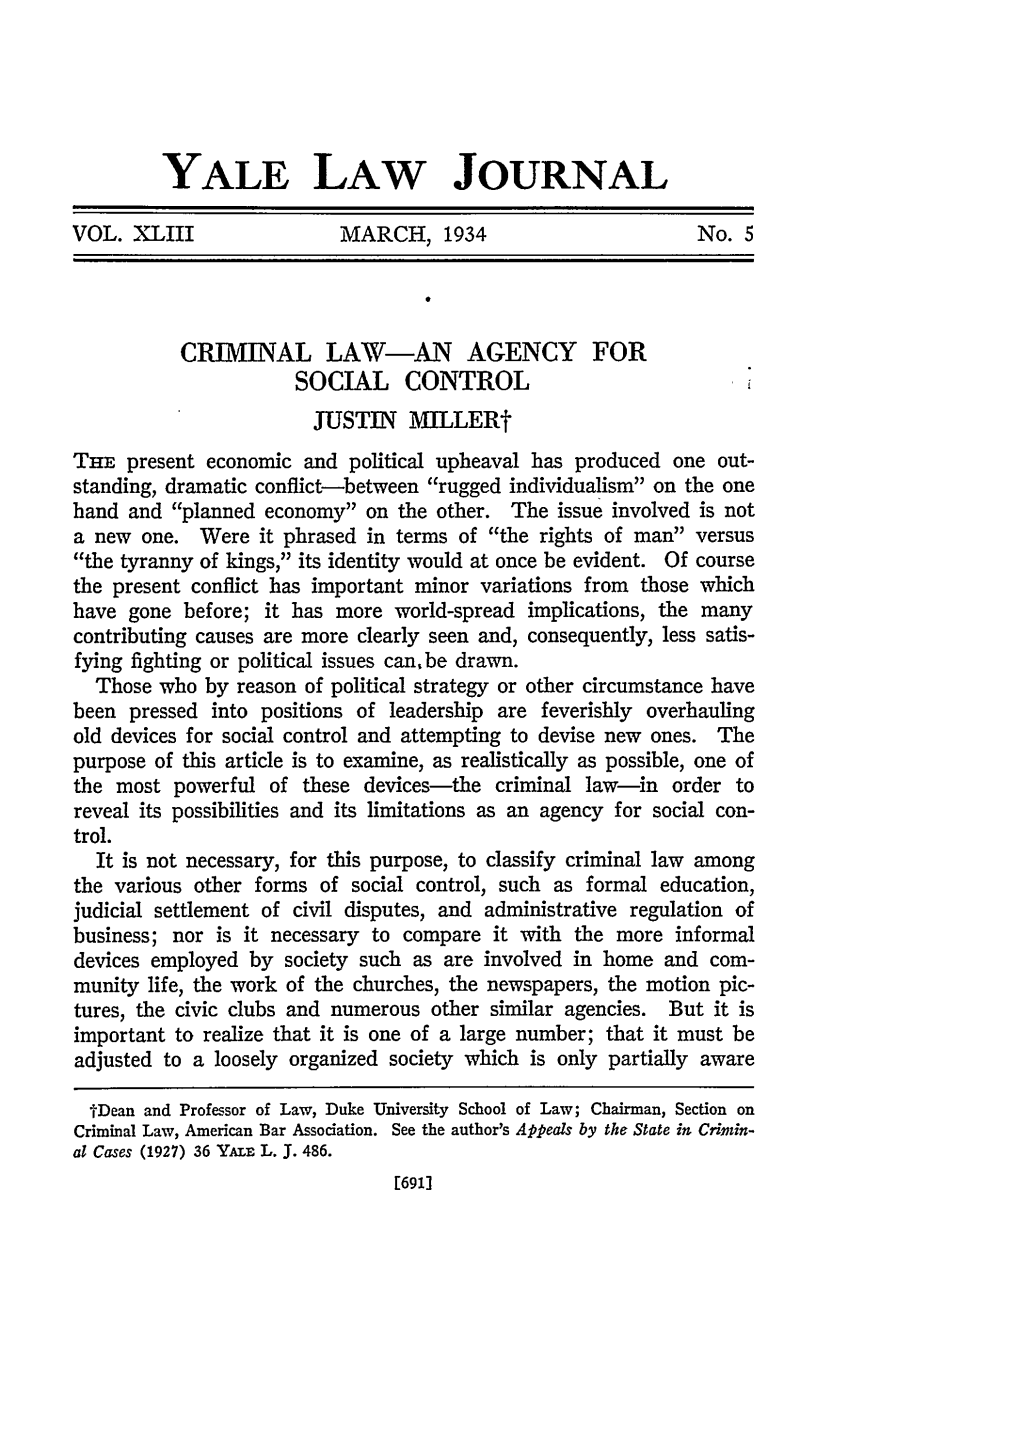 Criminal Law—An Agency for Social Control